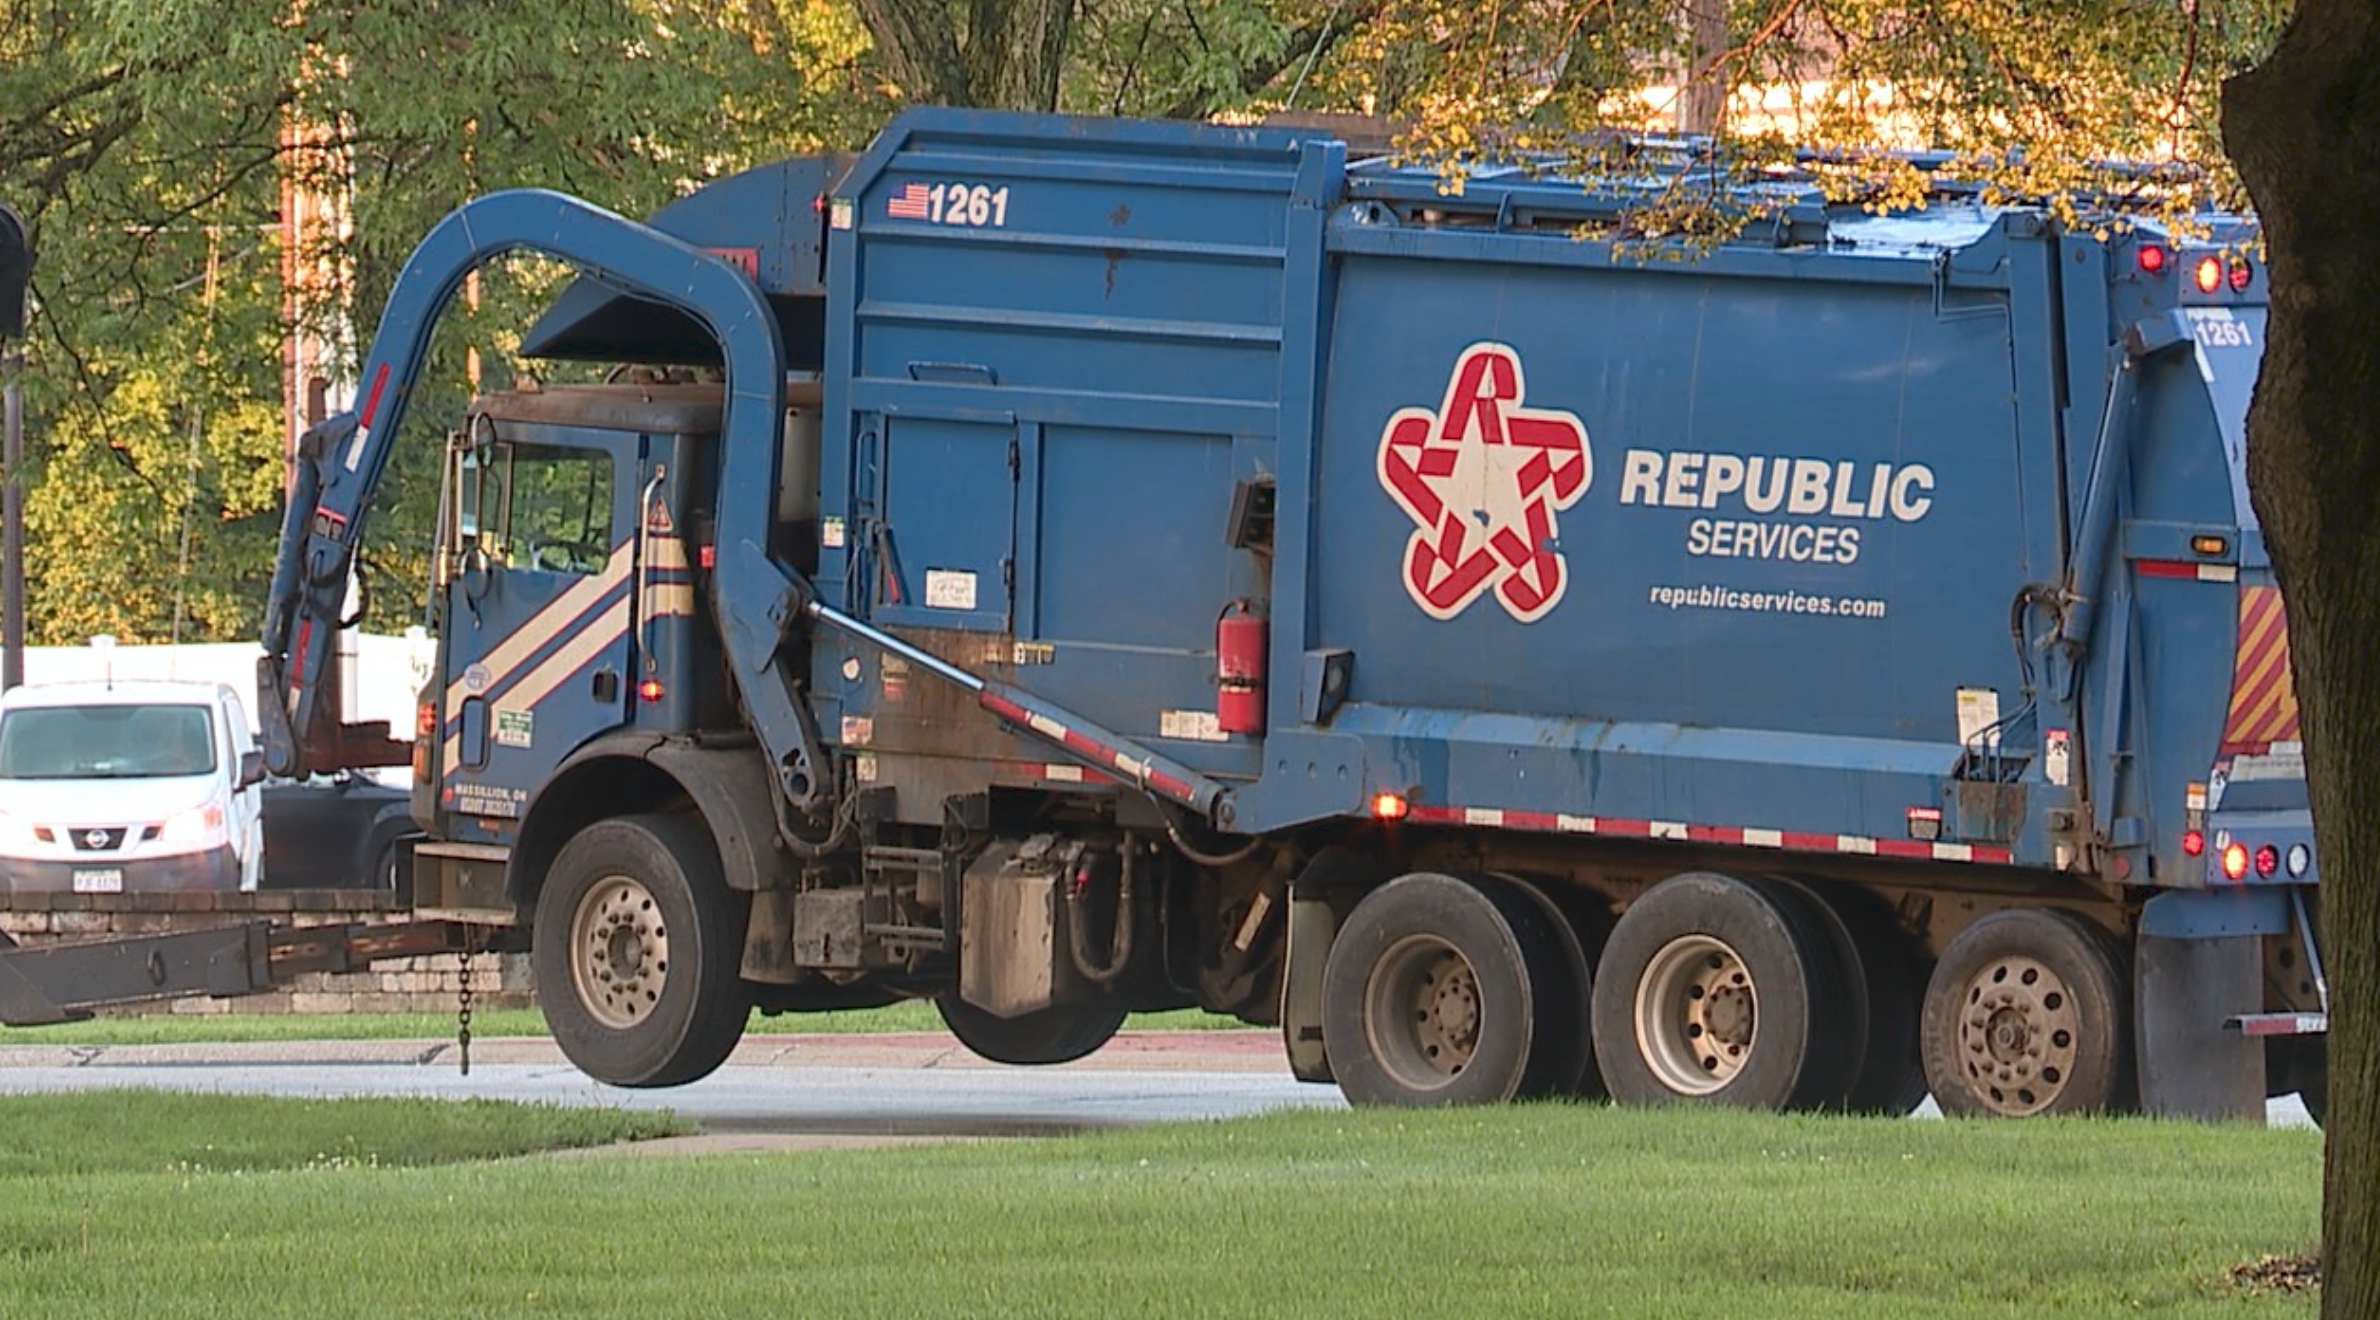 Willoughby Reminds Residents Of Changes In Trash Collection